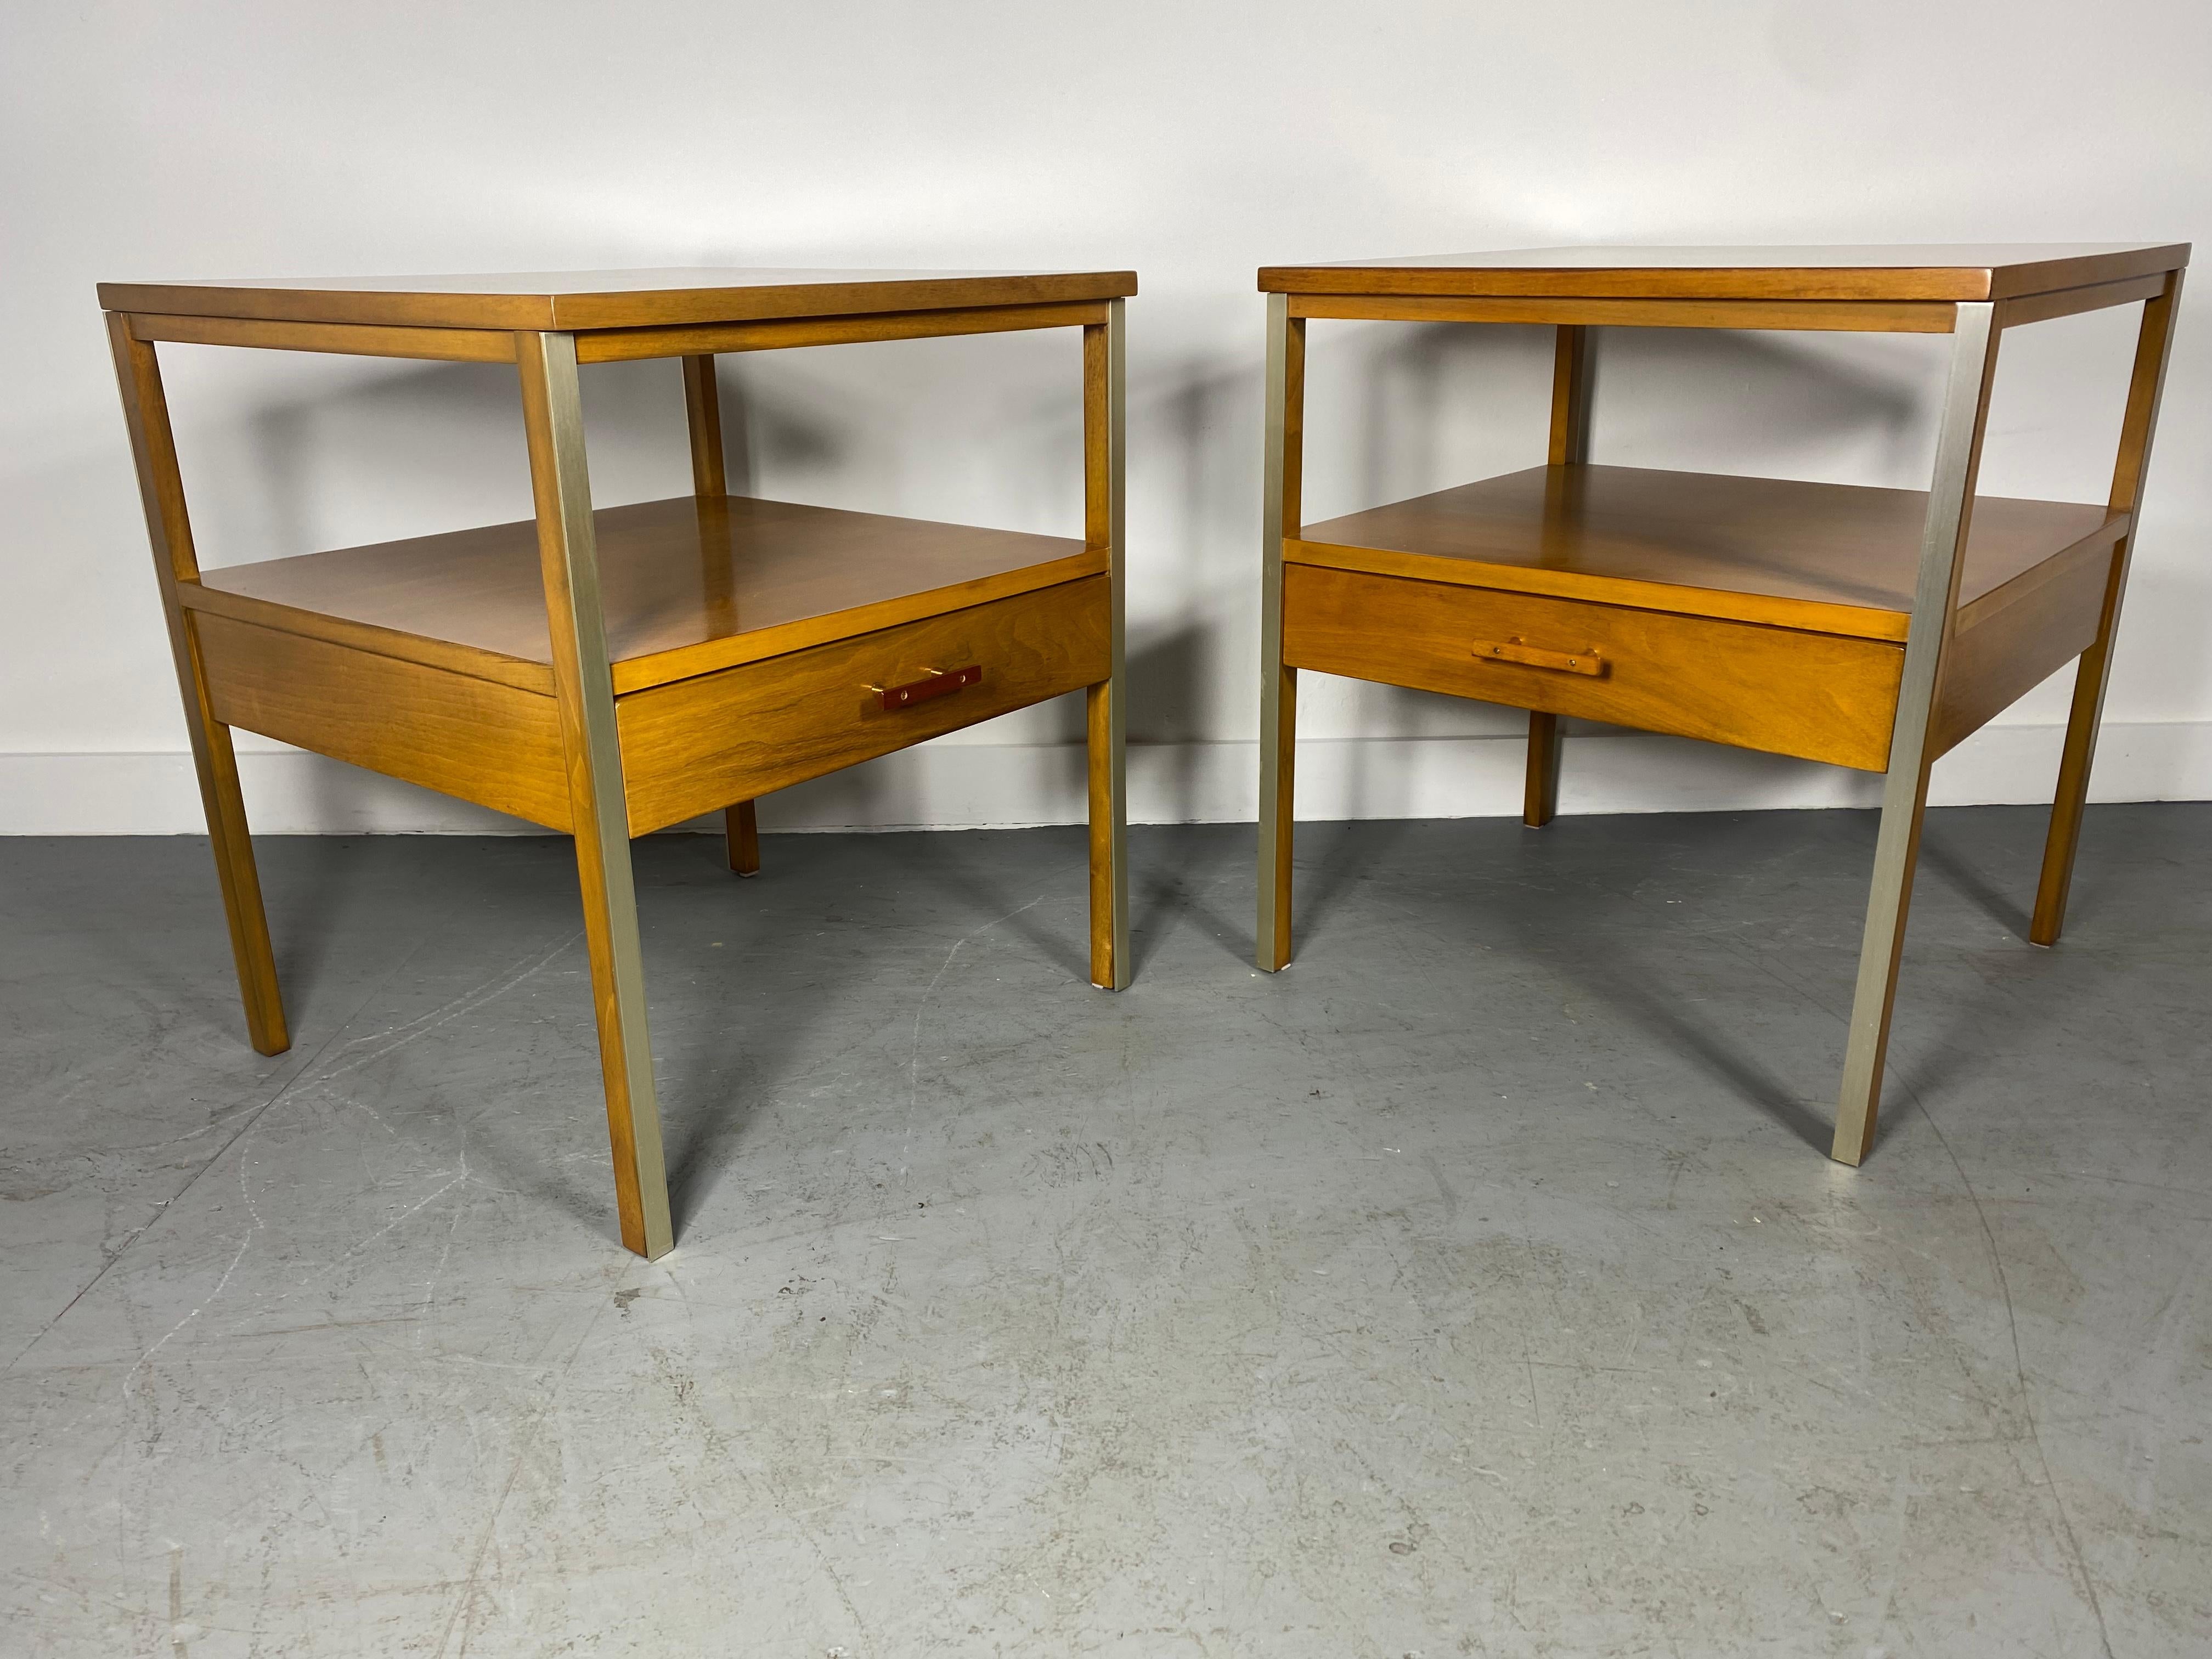 Beautiful pair of Paul McCobb Calvin walnut nightstands lamp tables single drawer Calvin wood and brass handles and accents, Minimalist original medium walnut honey finish. Very delicate geometric designed pair of nightstands with square legs - All